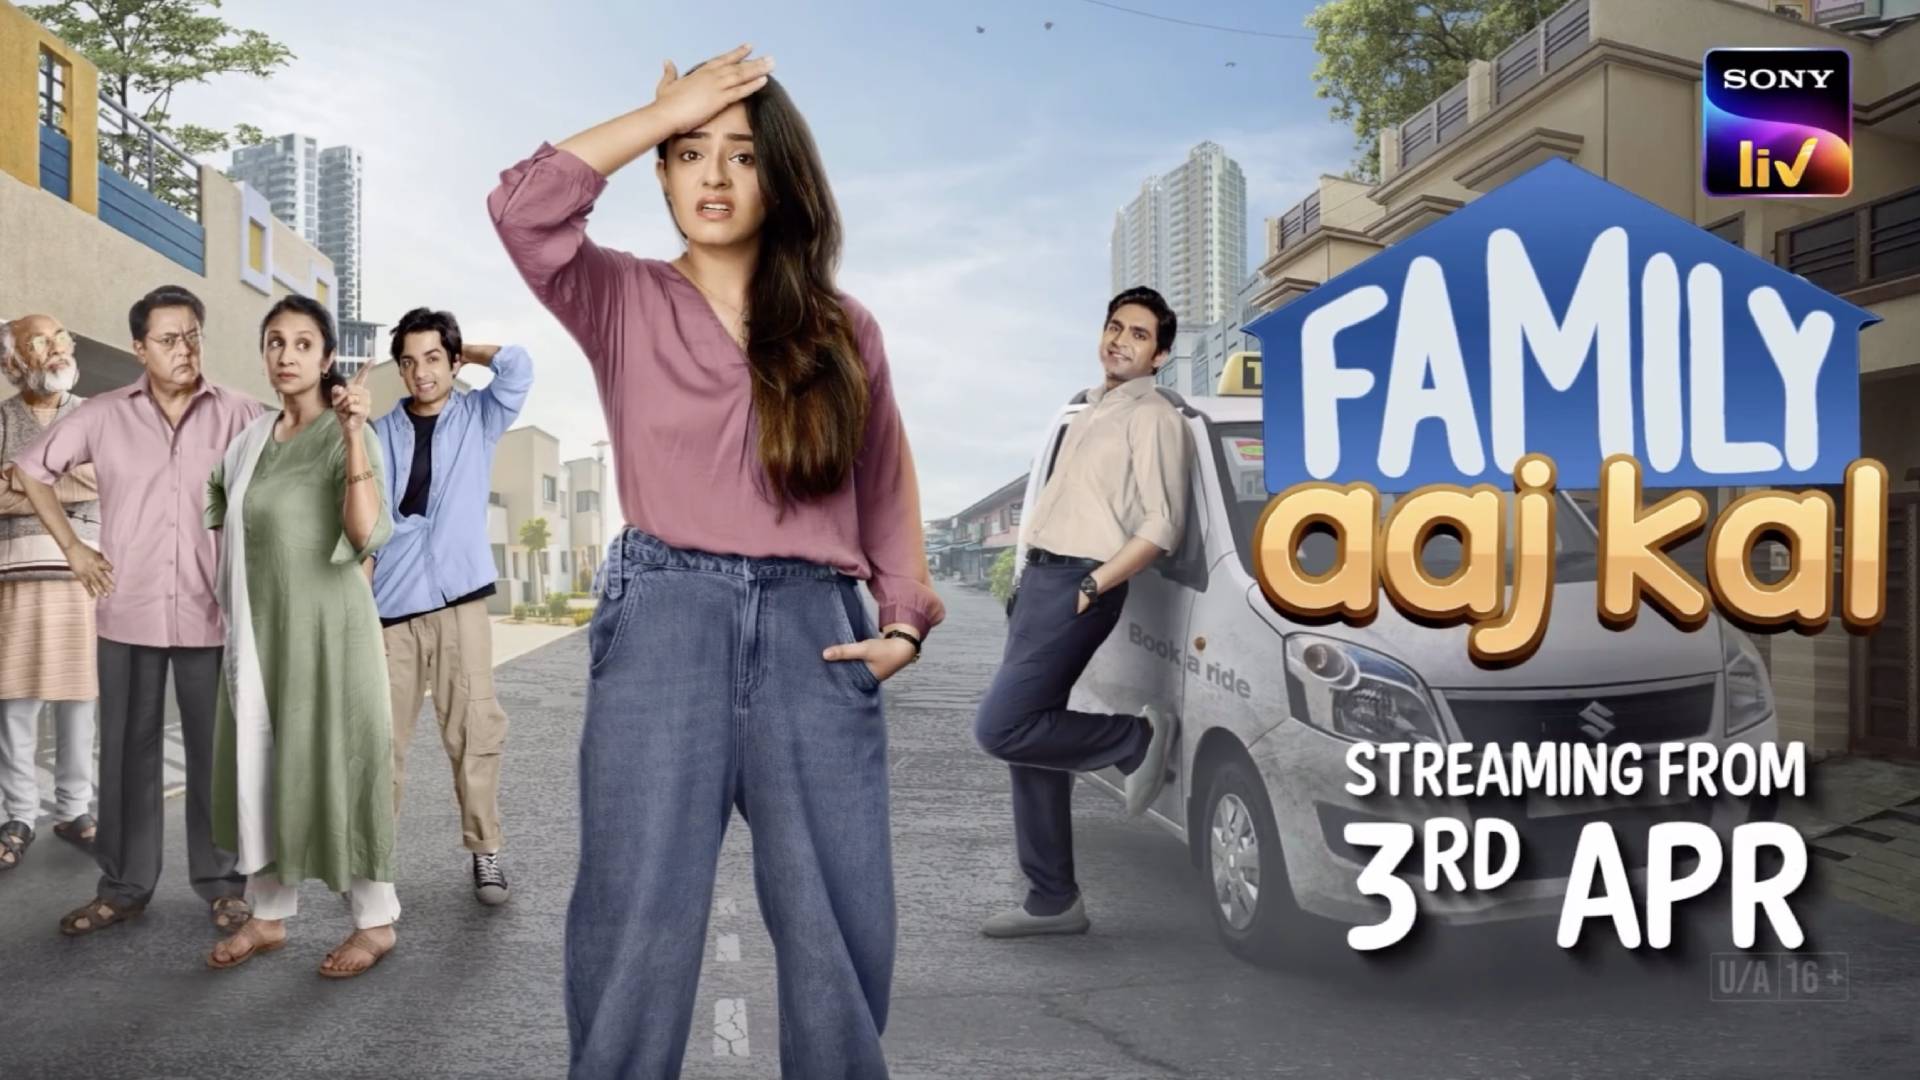 Join the Kashyap Clan: In Sony LIV’s Family Drama – Family Aaj Kal; streaming from 3rd April